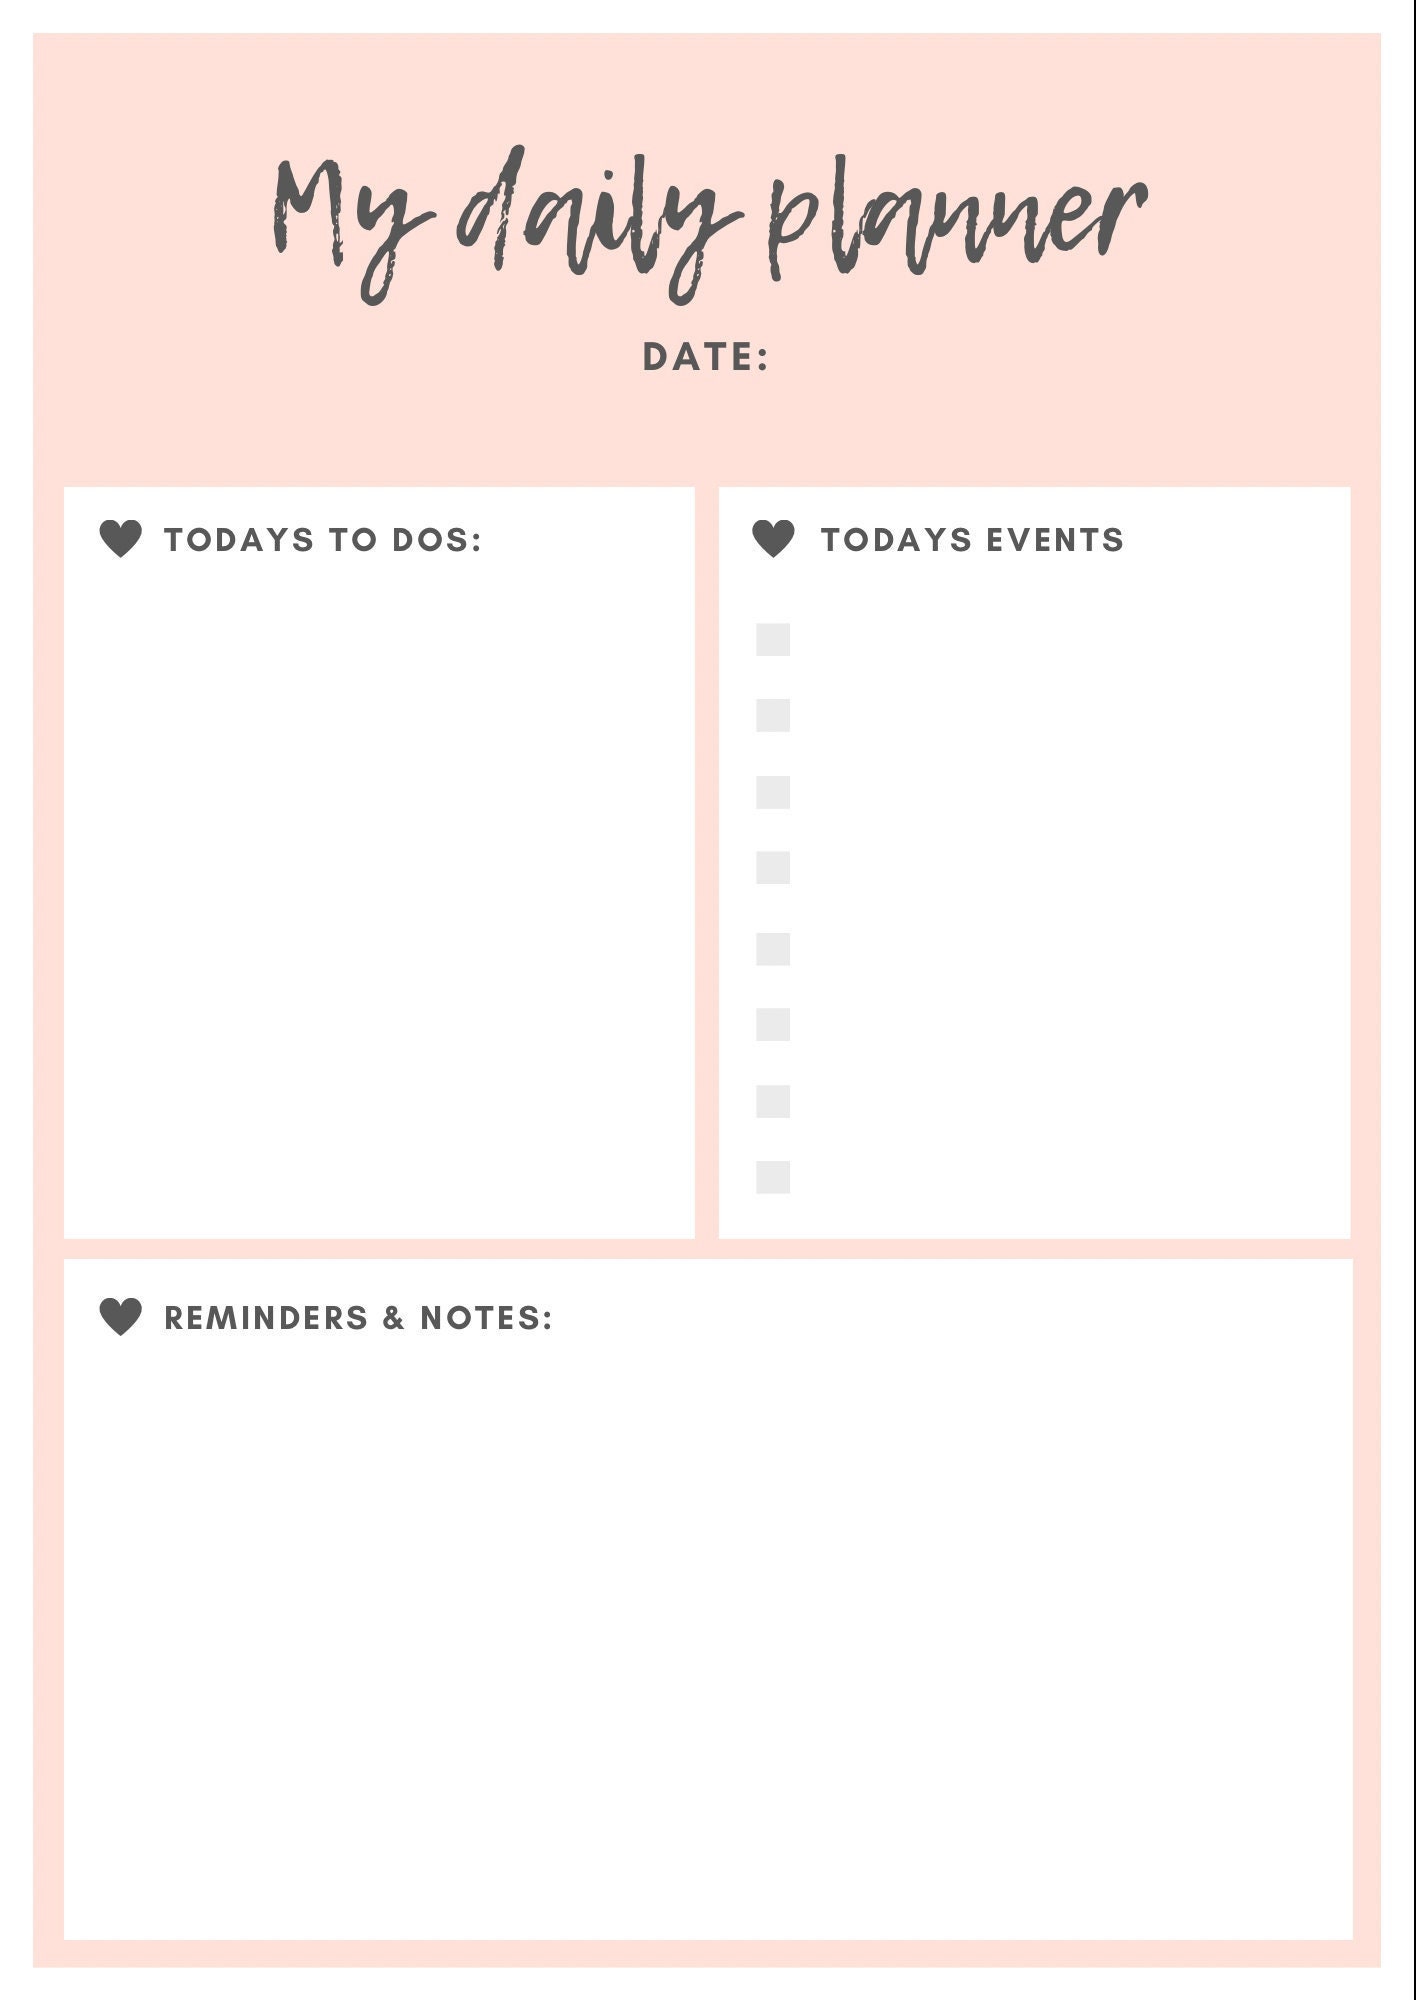 Daily Digital Planner Printable Daily Planner to Do List | Etsy